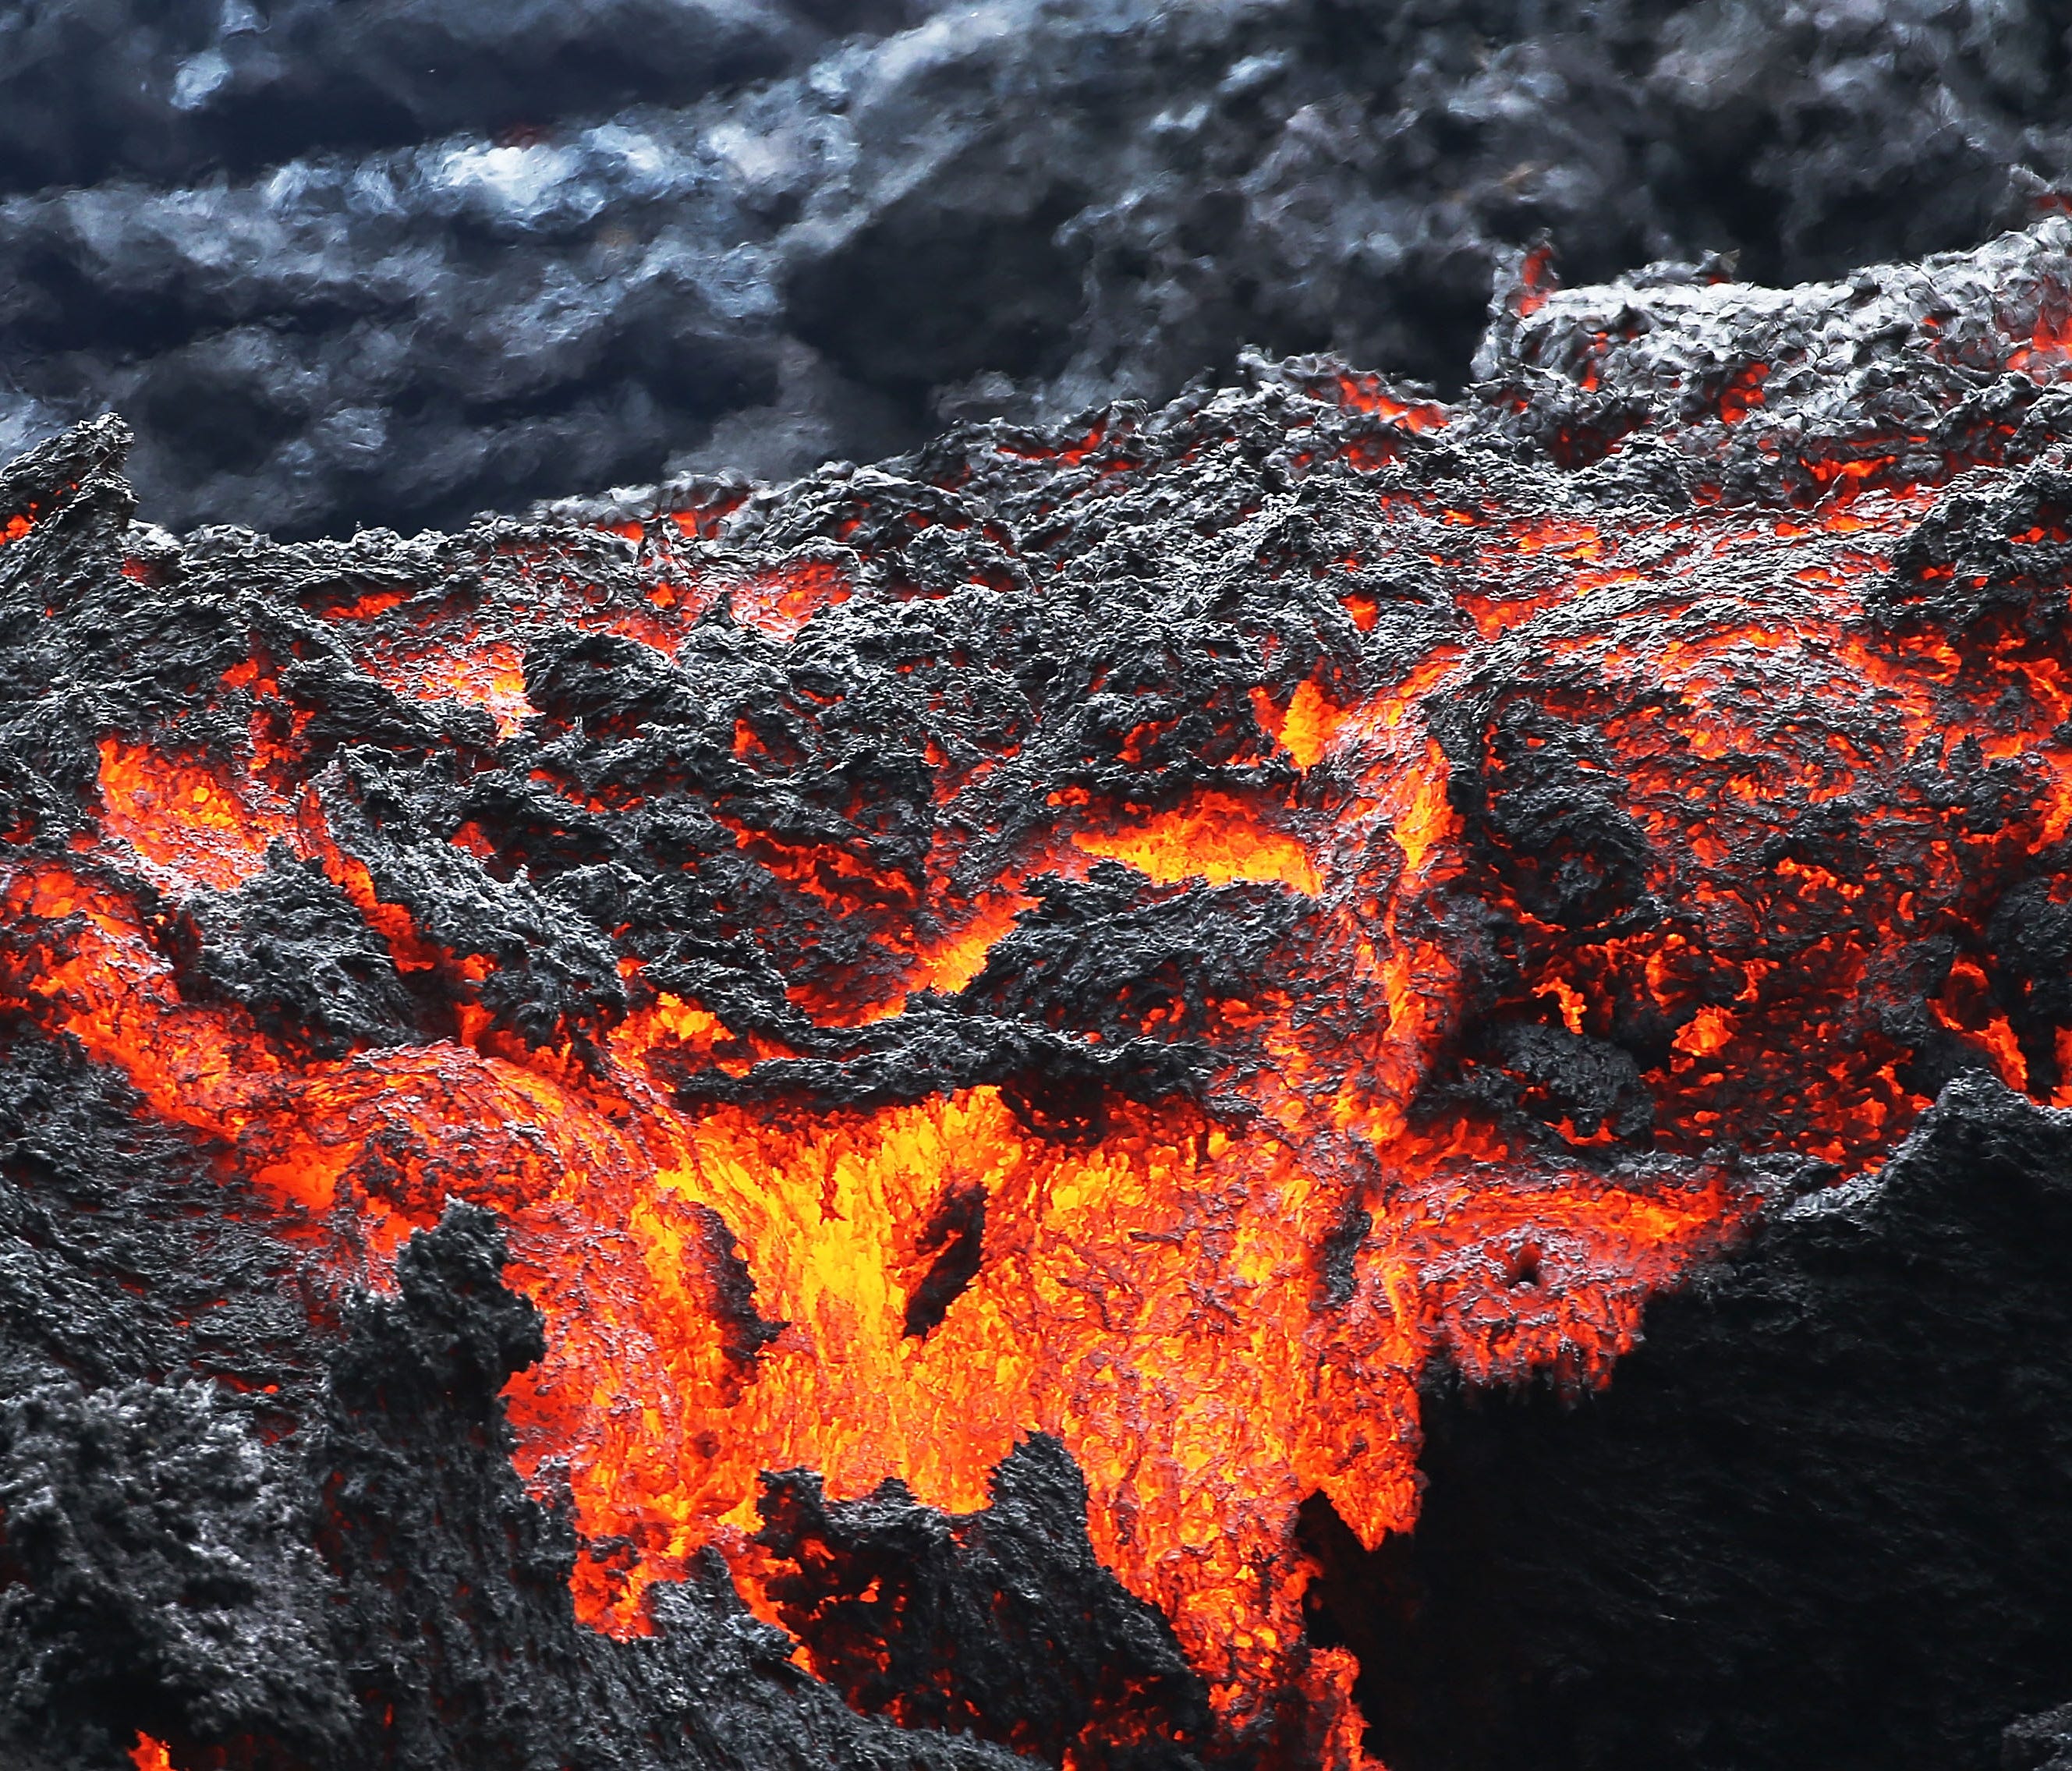 Lava flows at a lava fissure in the aftermath of eruptions from the Kilauea volcano on Hawaii's Big Island on May 12, 2018 in Pahoa, Hawaii.